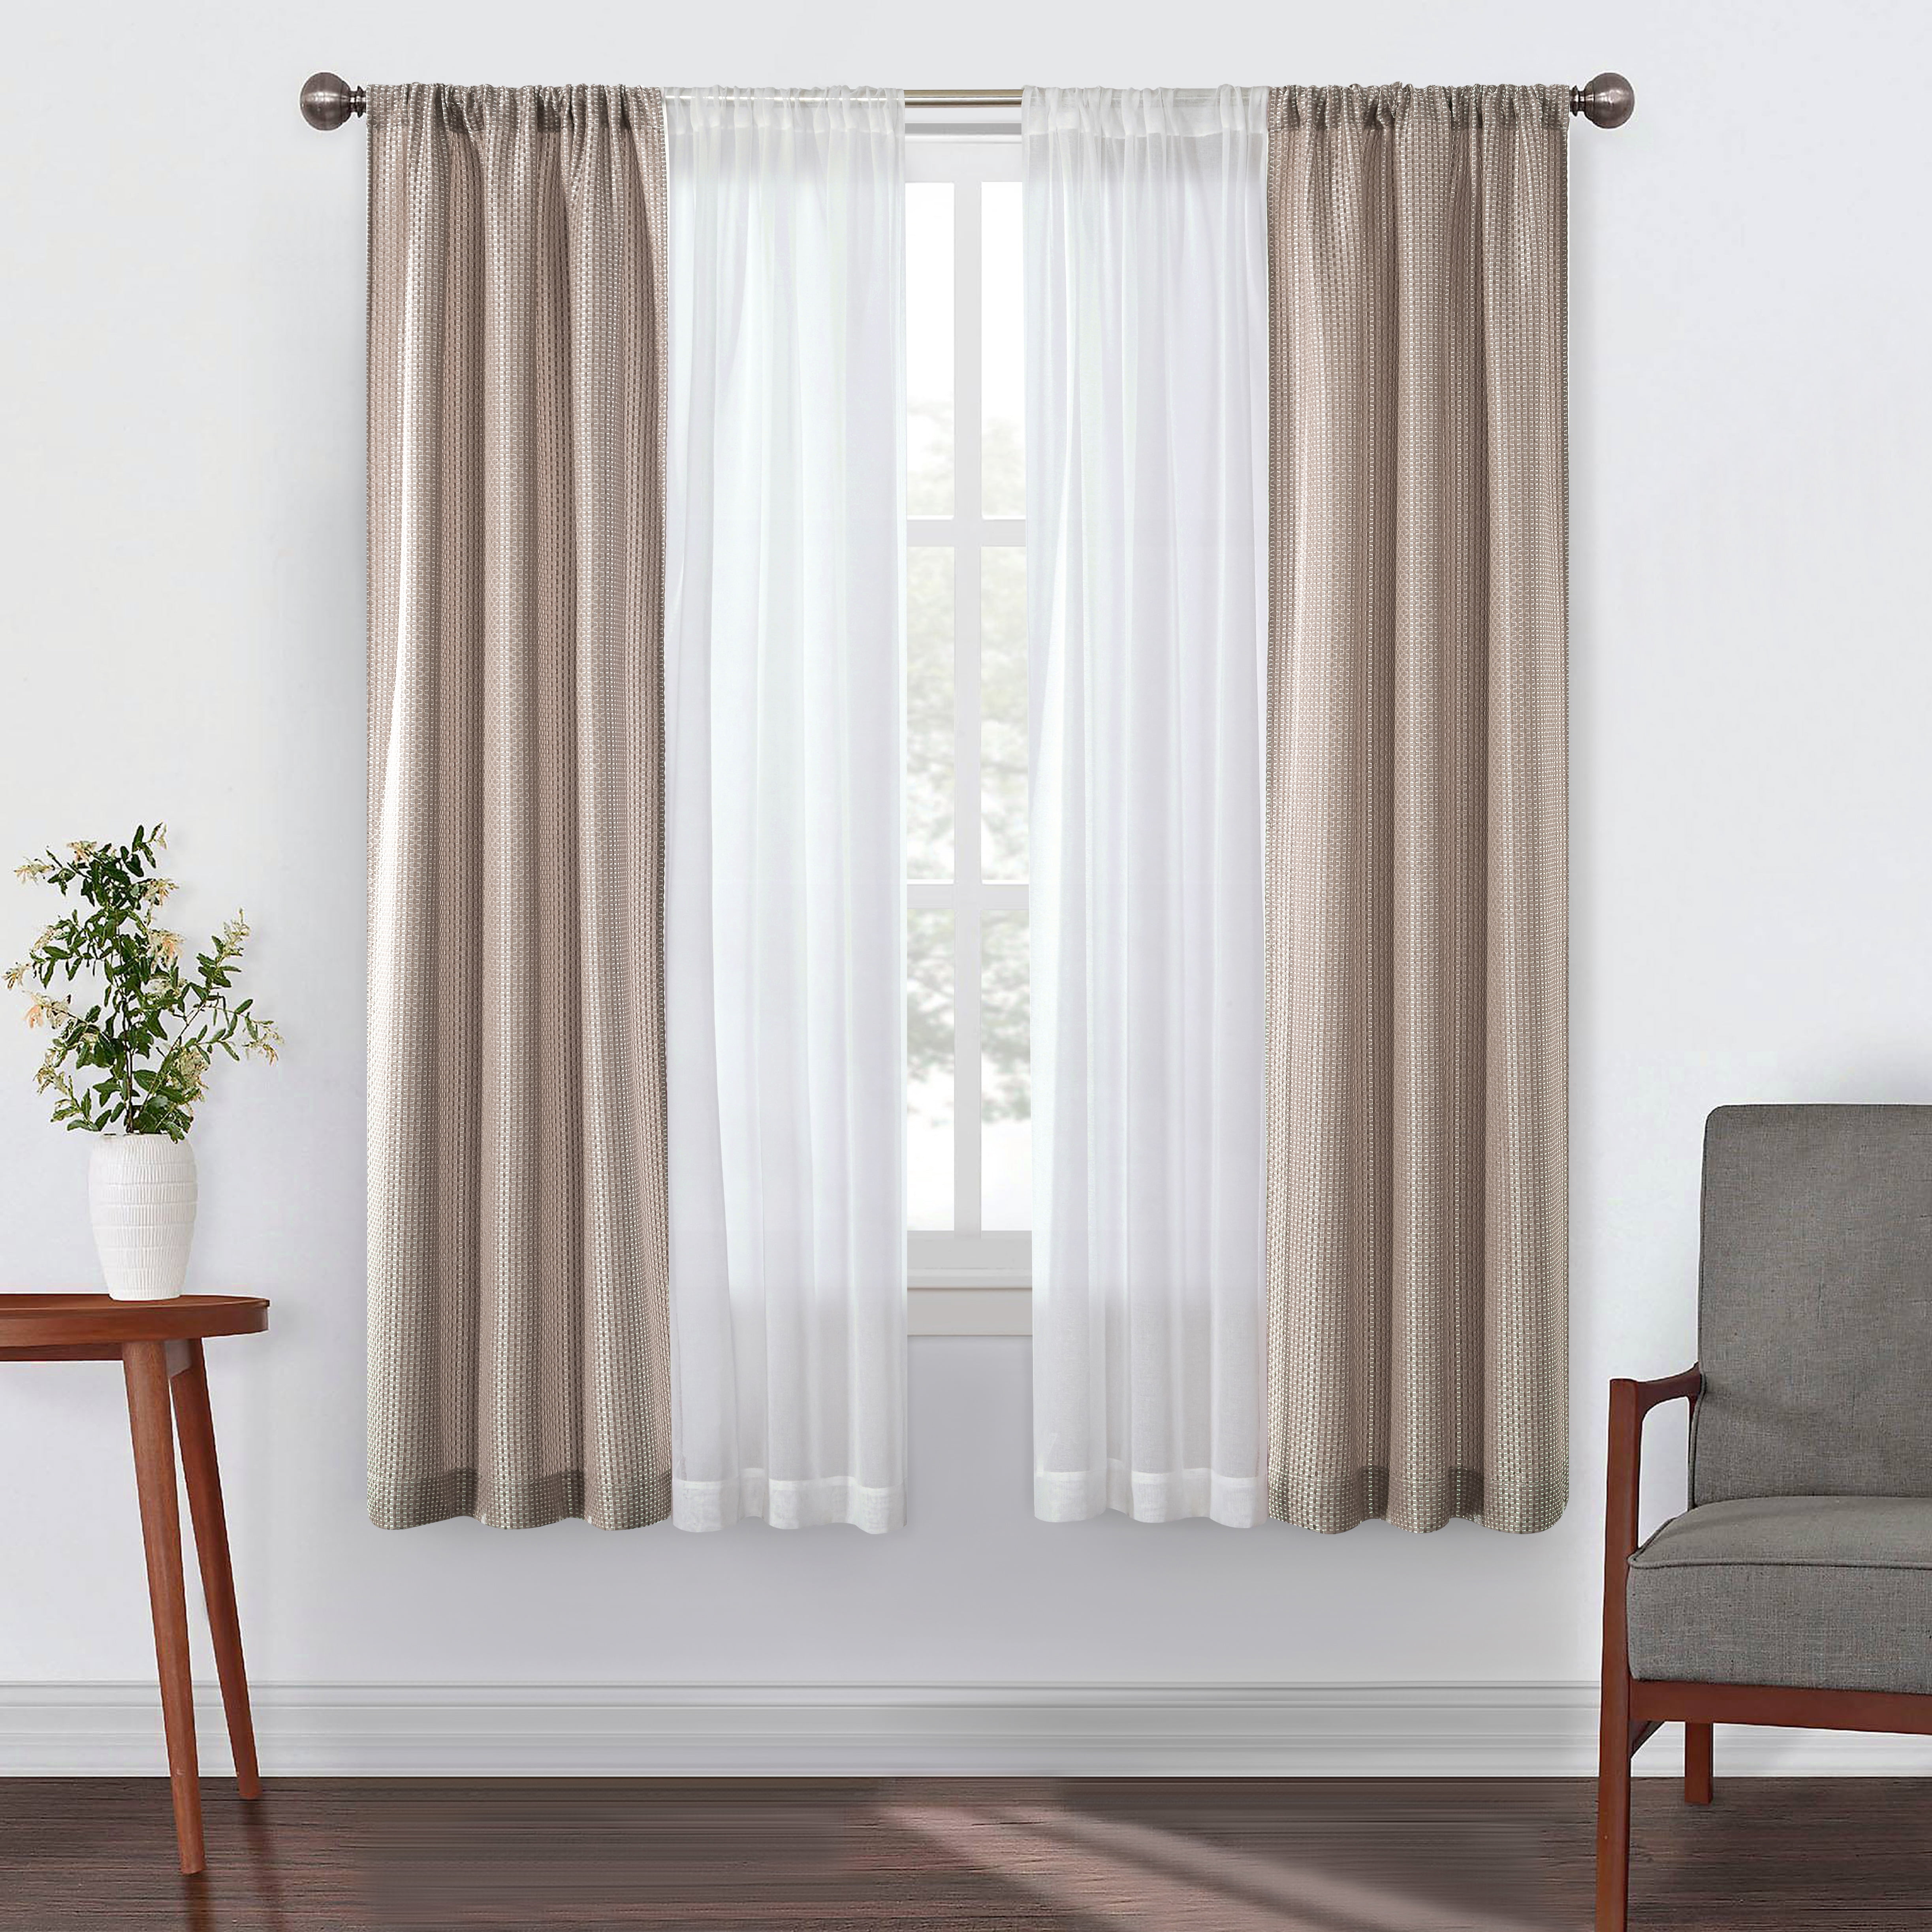 Better Homes & Gardens 4 Piece Taupe Open Stitch & Solid Curtain & Sheer  Panel Set, Taupe, 74x63